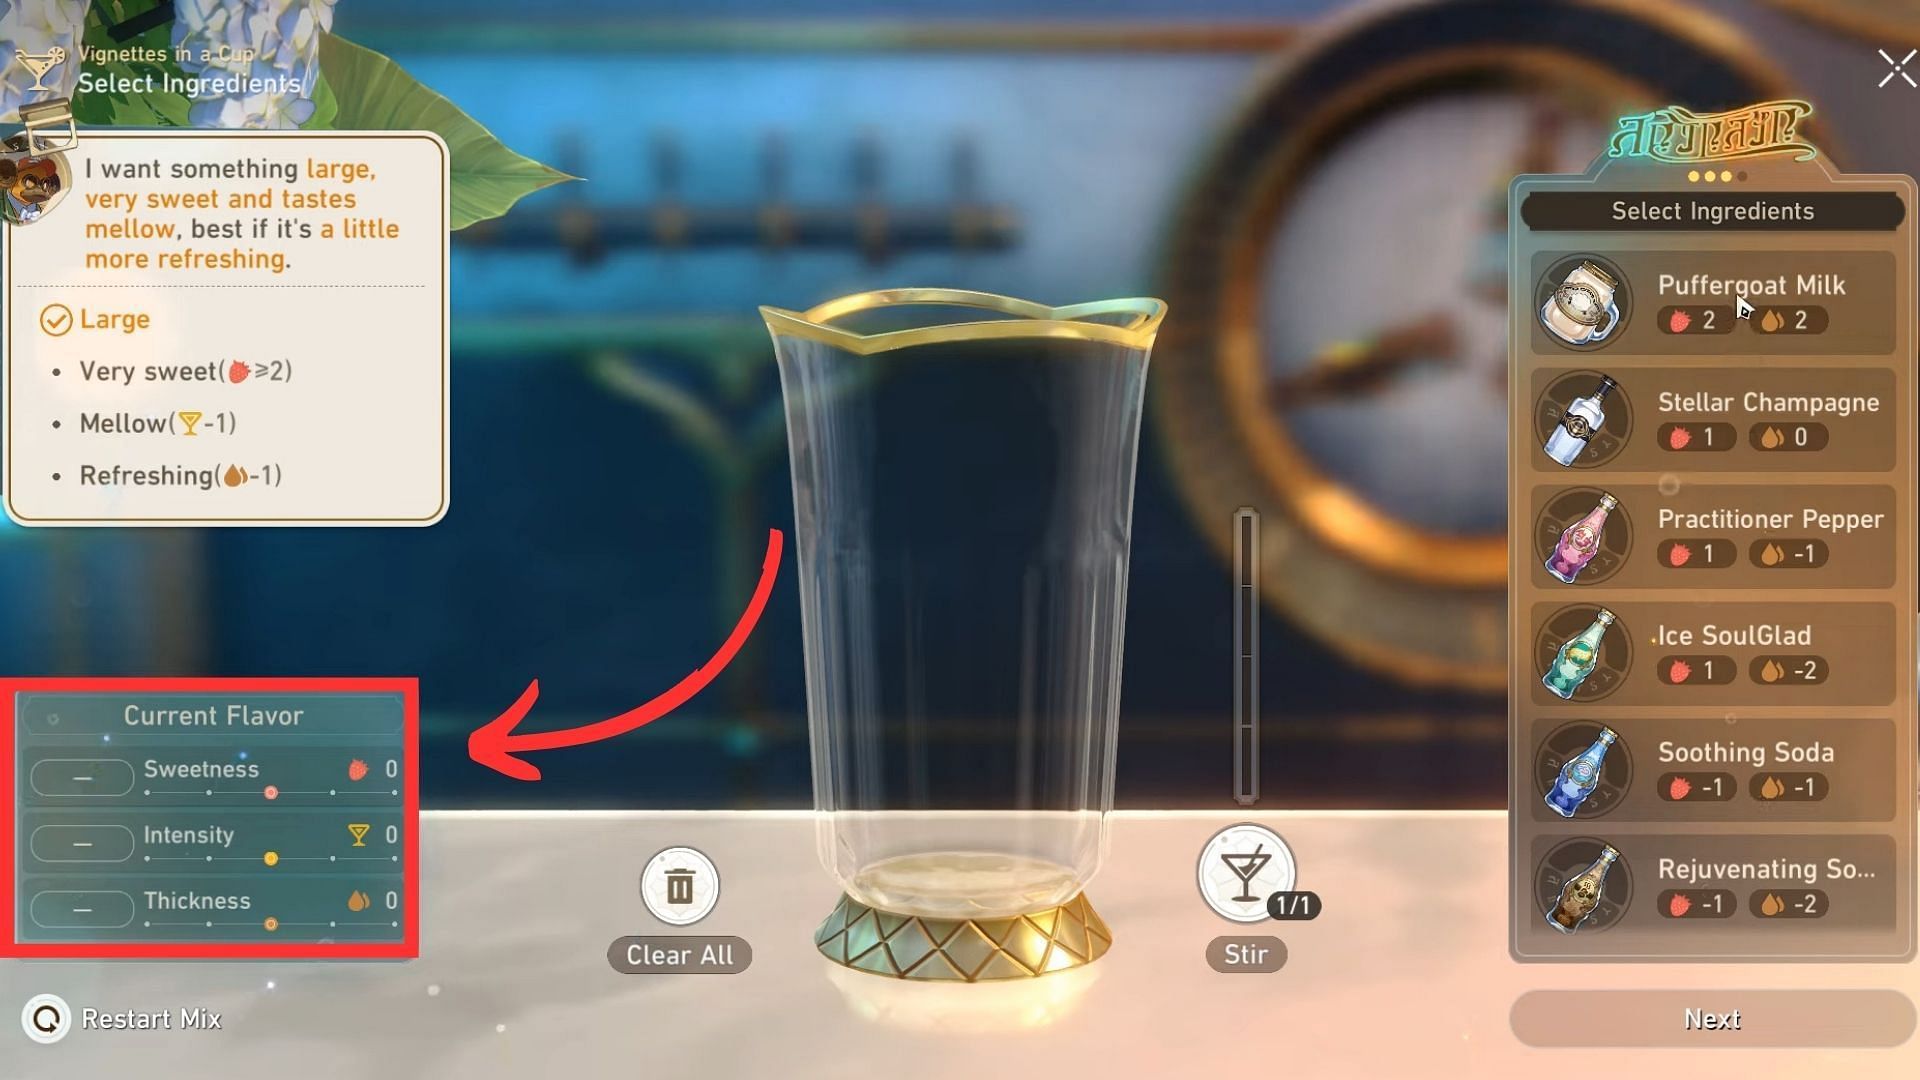 Keep an eye on the current flavor while mixing drinks (Image via HoYoverse)